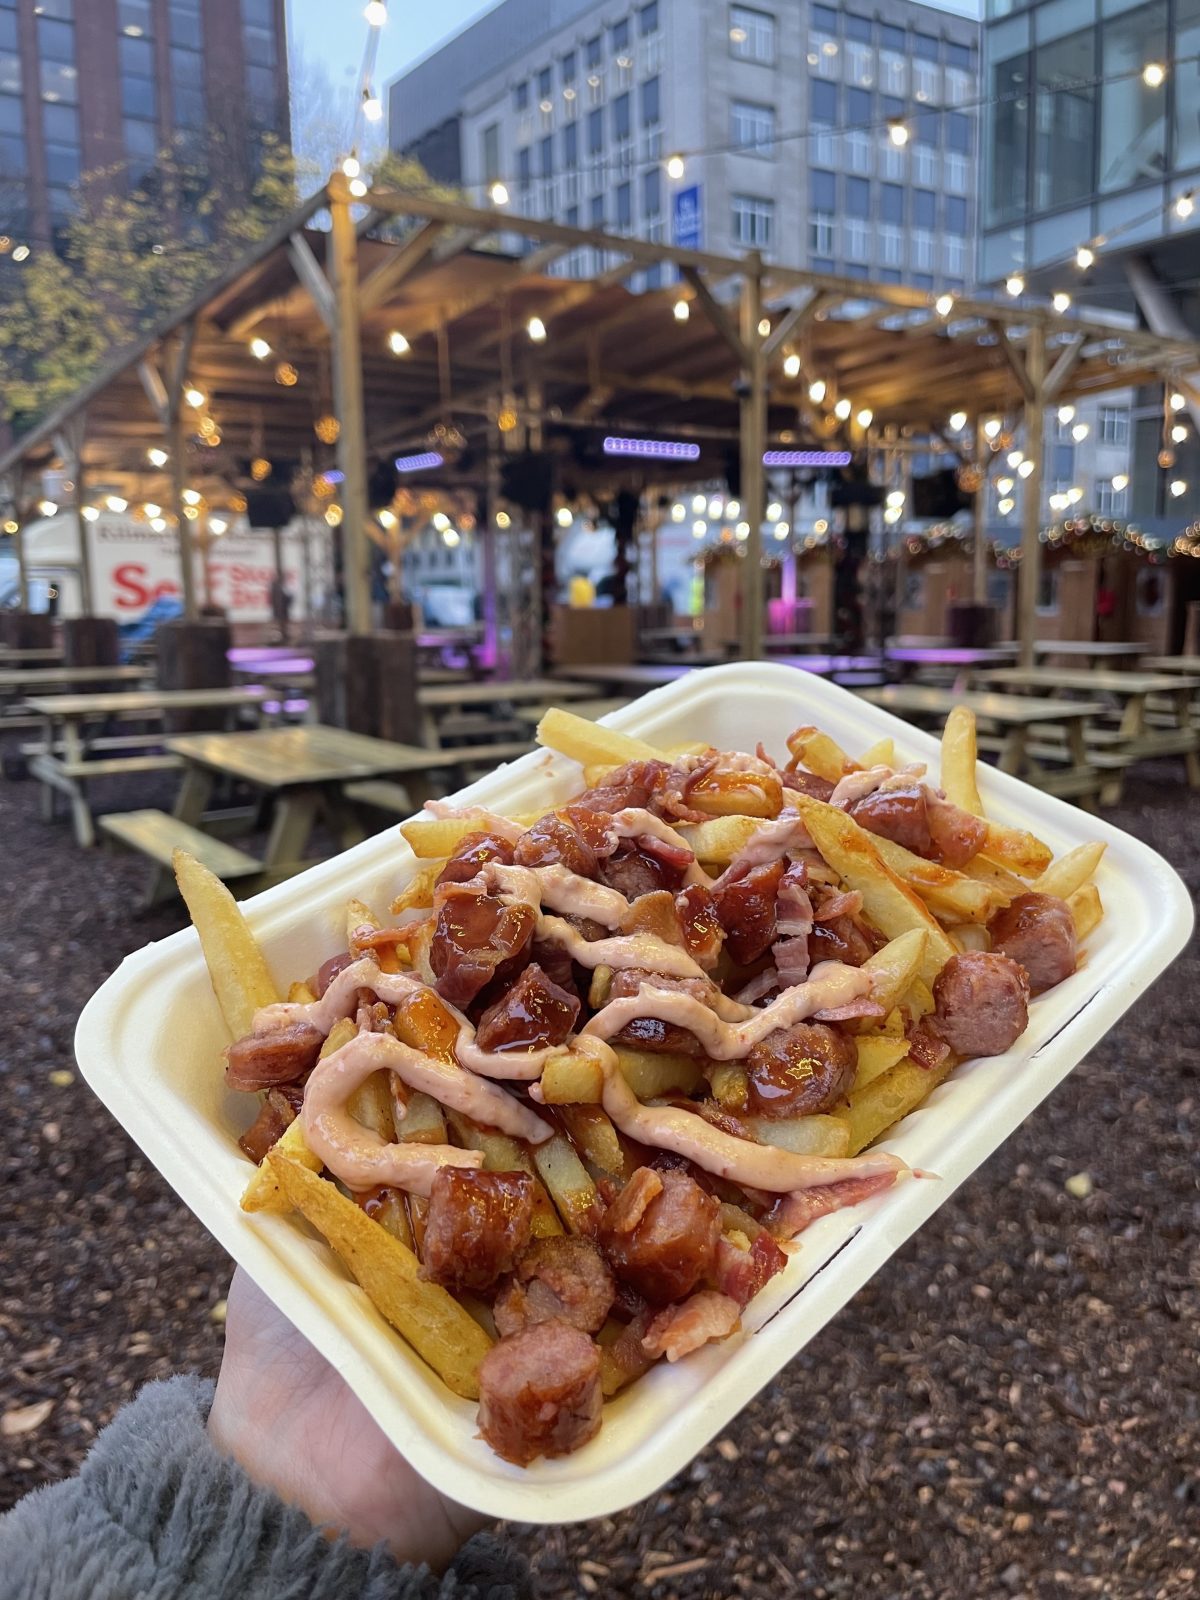 A Christmas kebab menu with pigs in blanket-loaded fries has launched in Manchester, The Manc